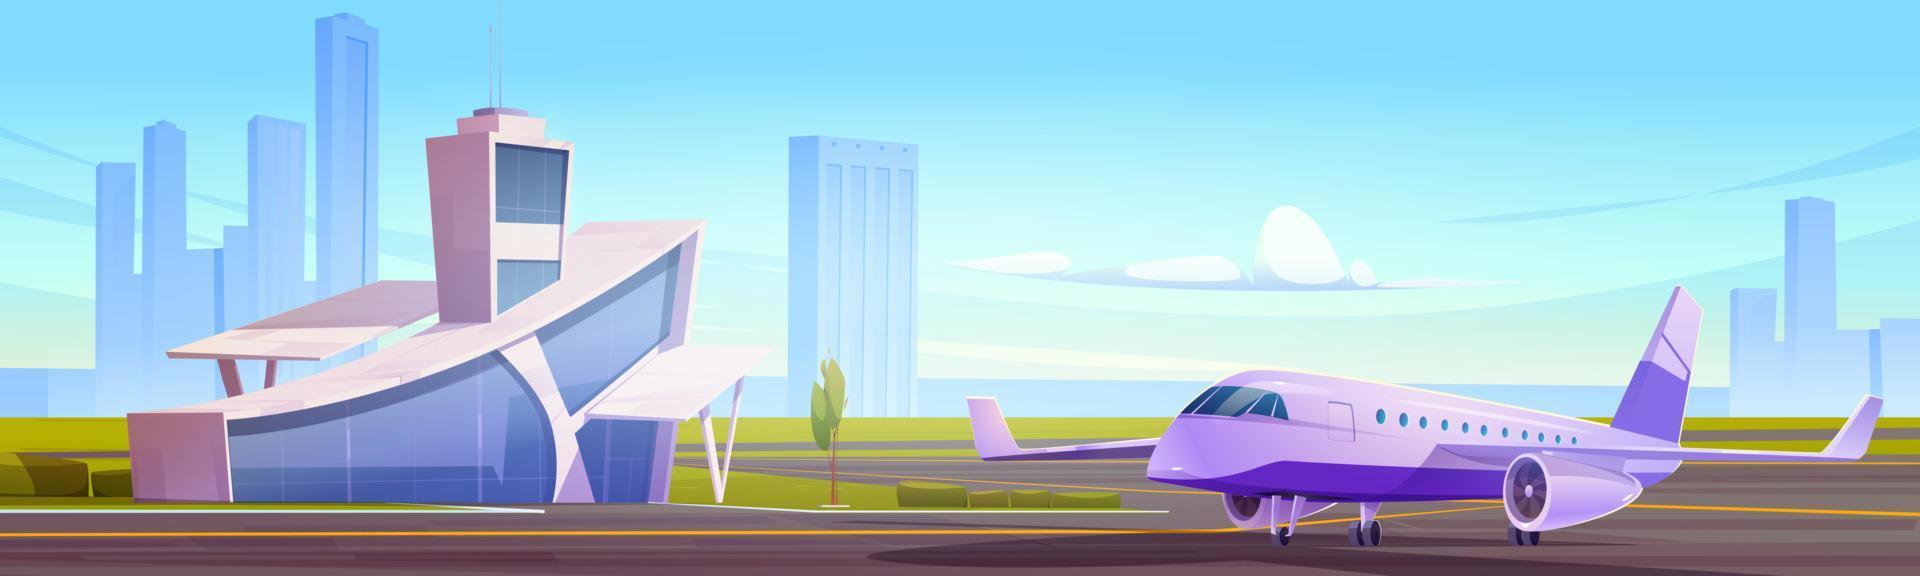 Airport terminal building with tower and airplane vector